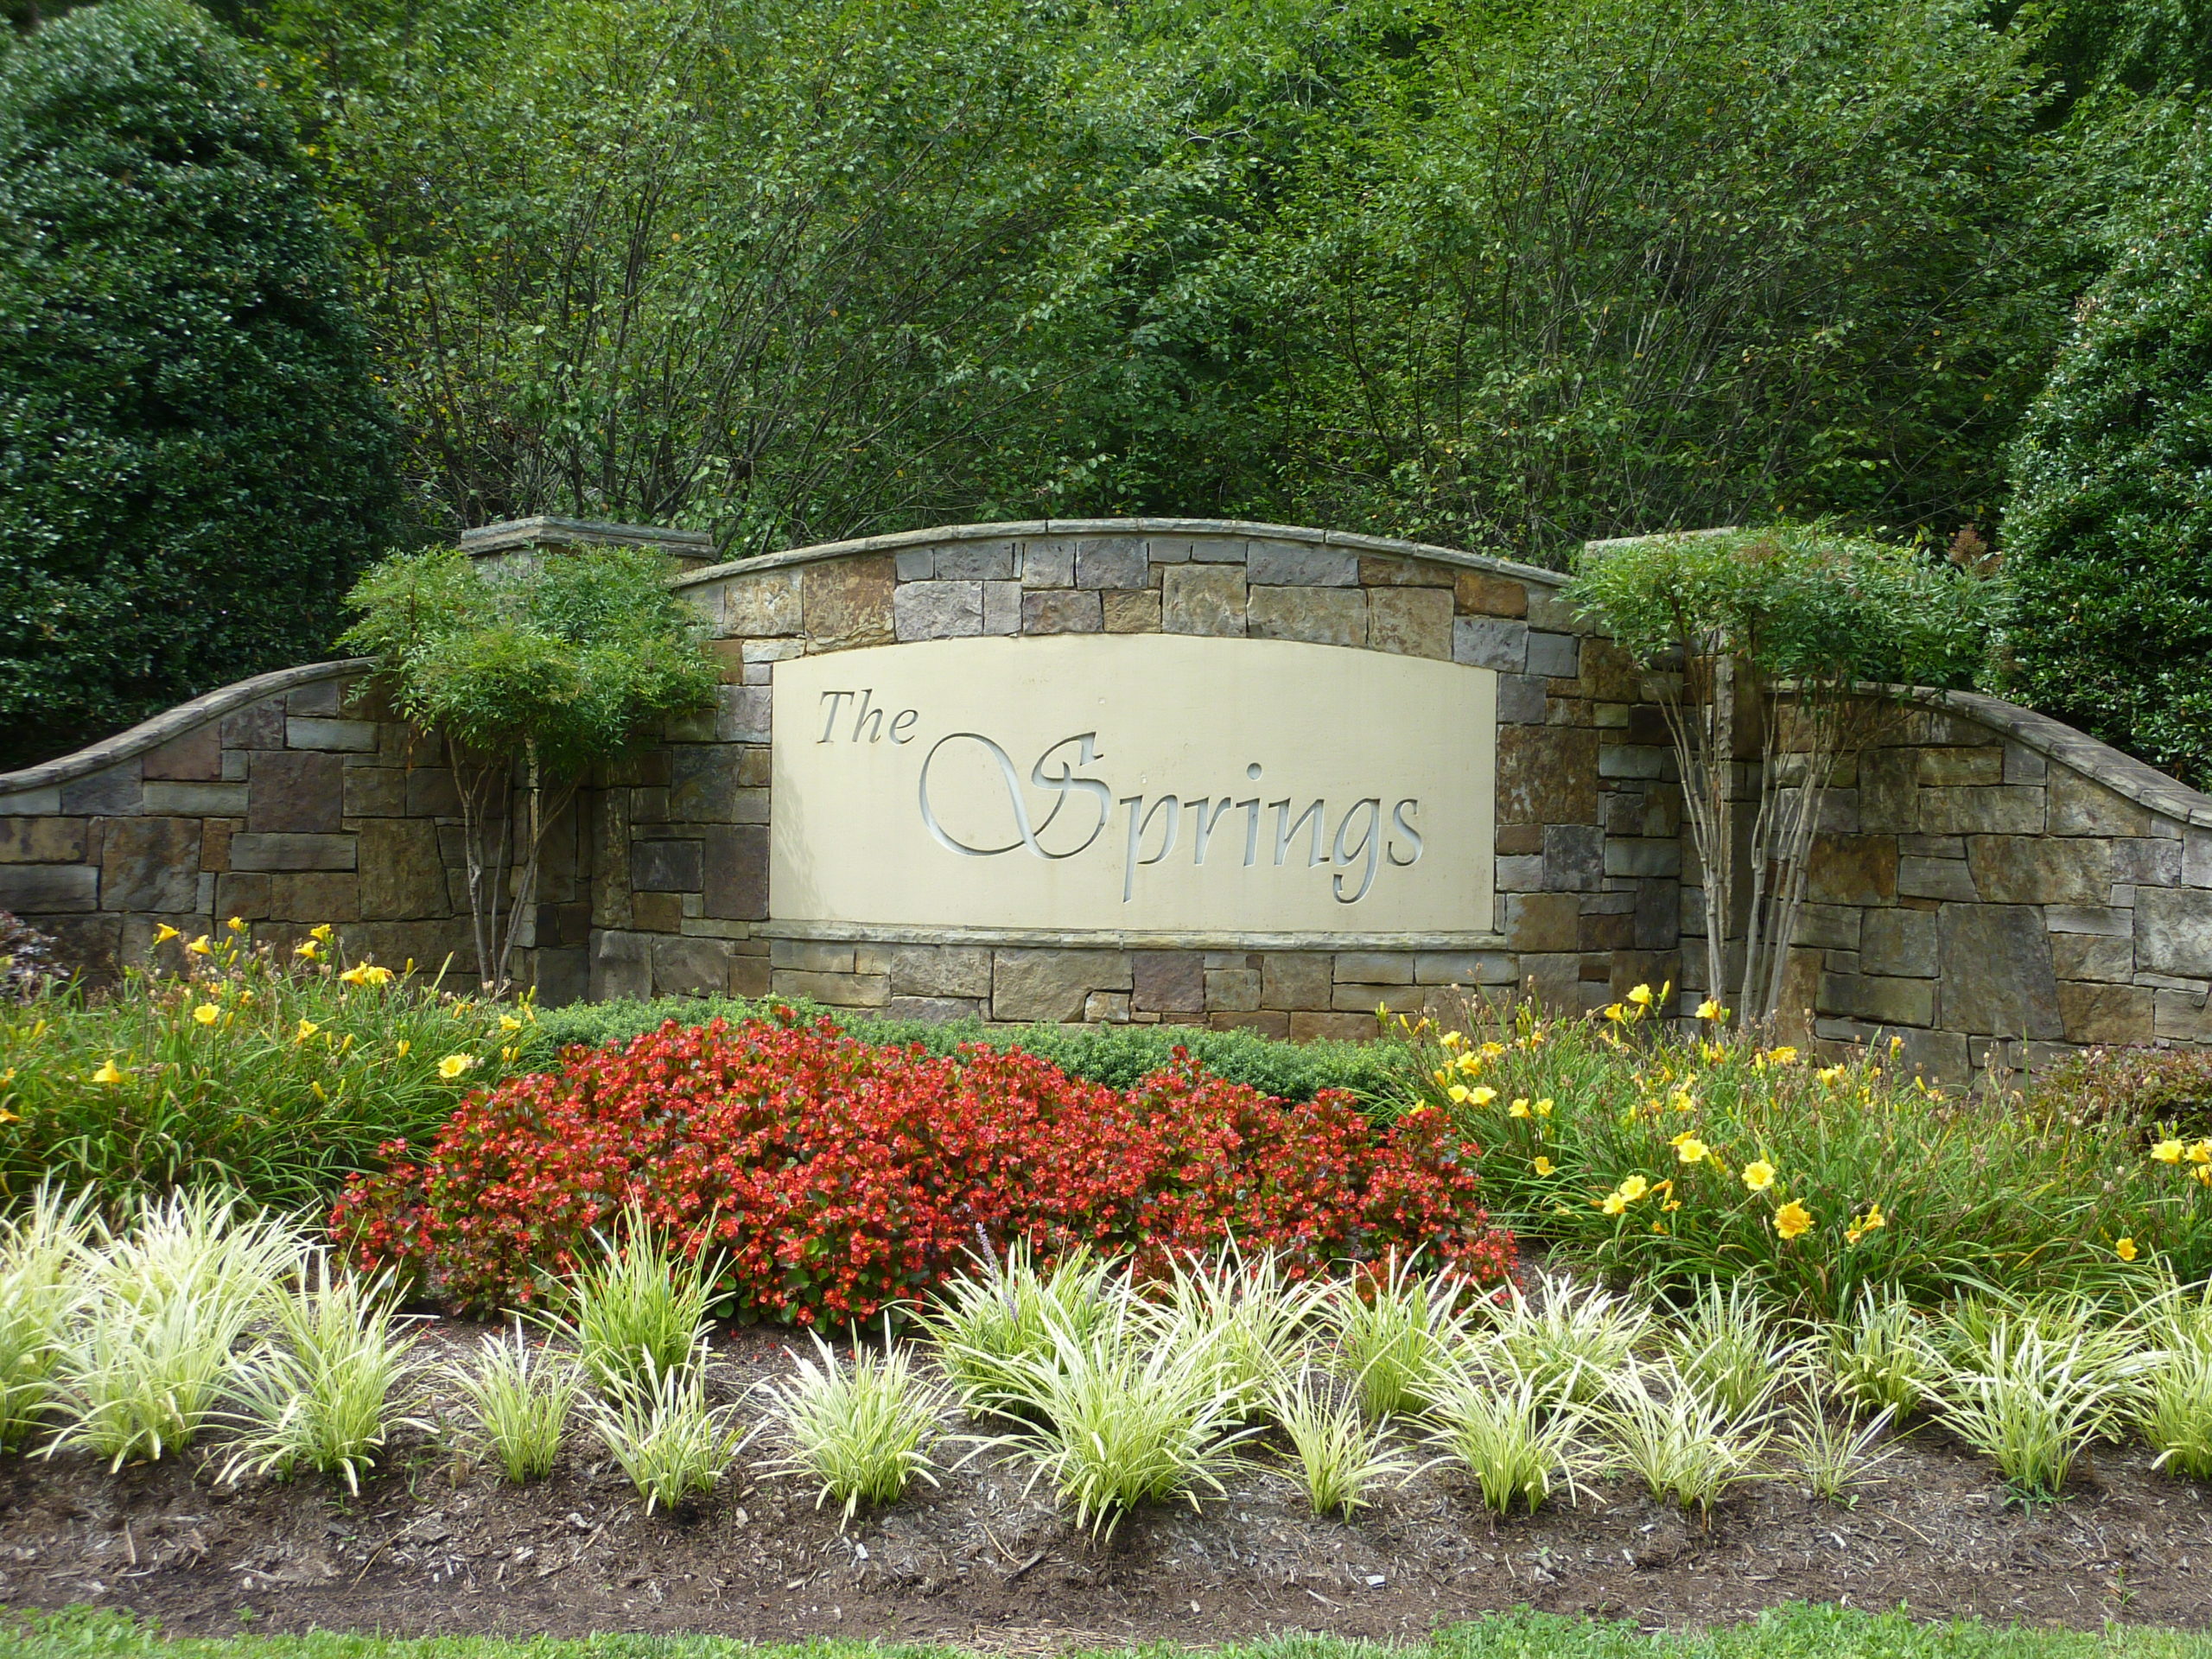 Stone entrance of The Springs at High Rock Lake with flower display in front